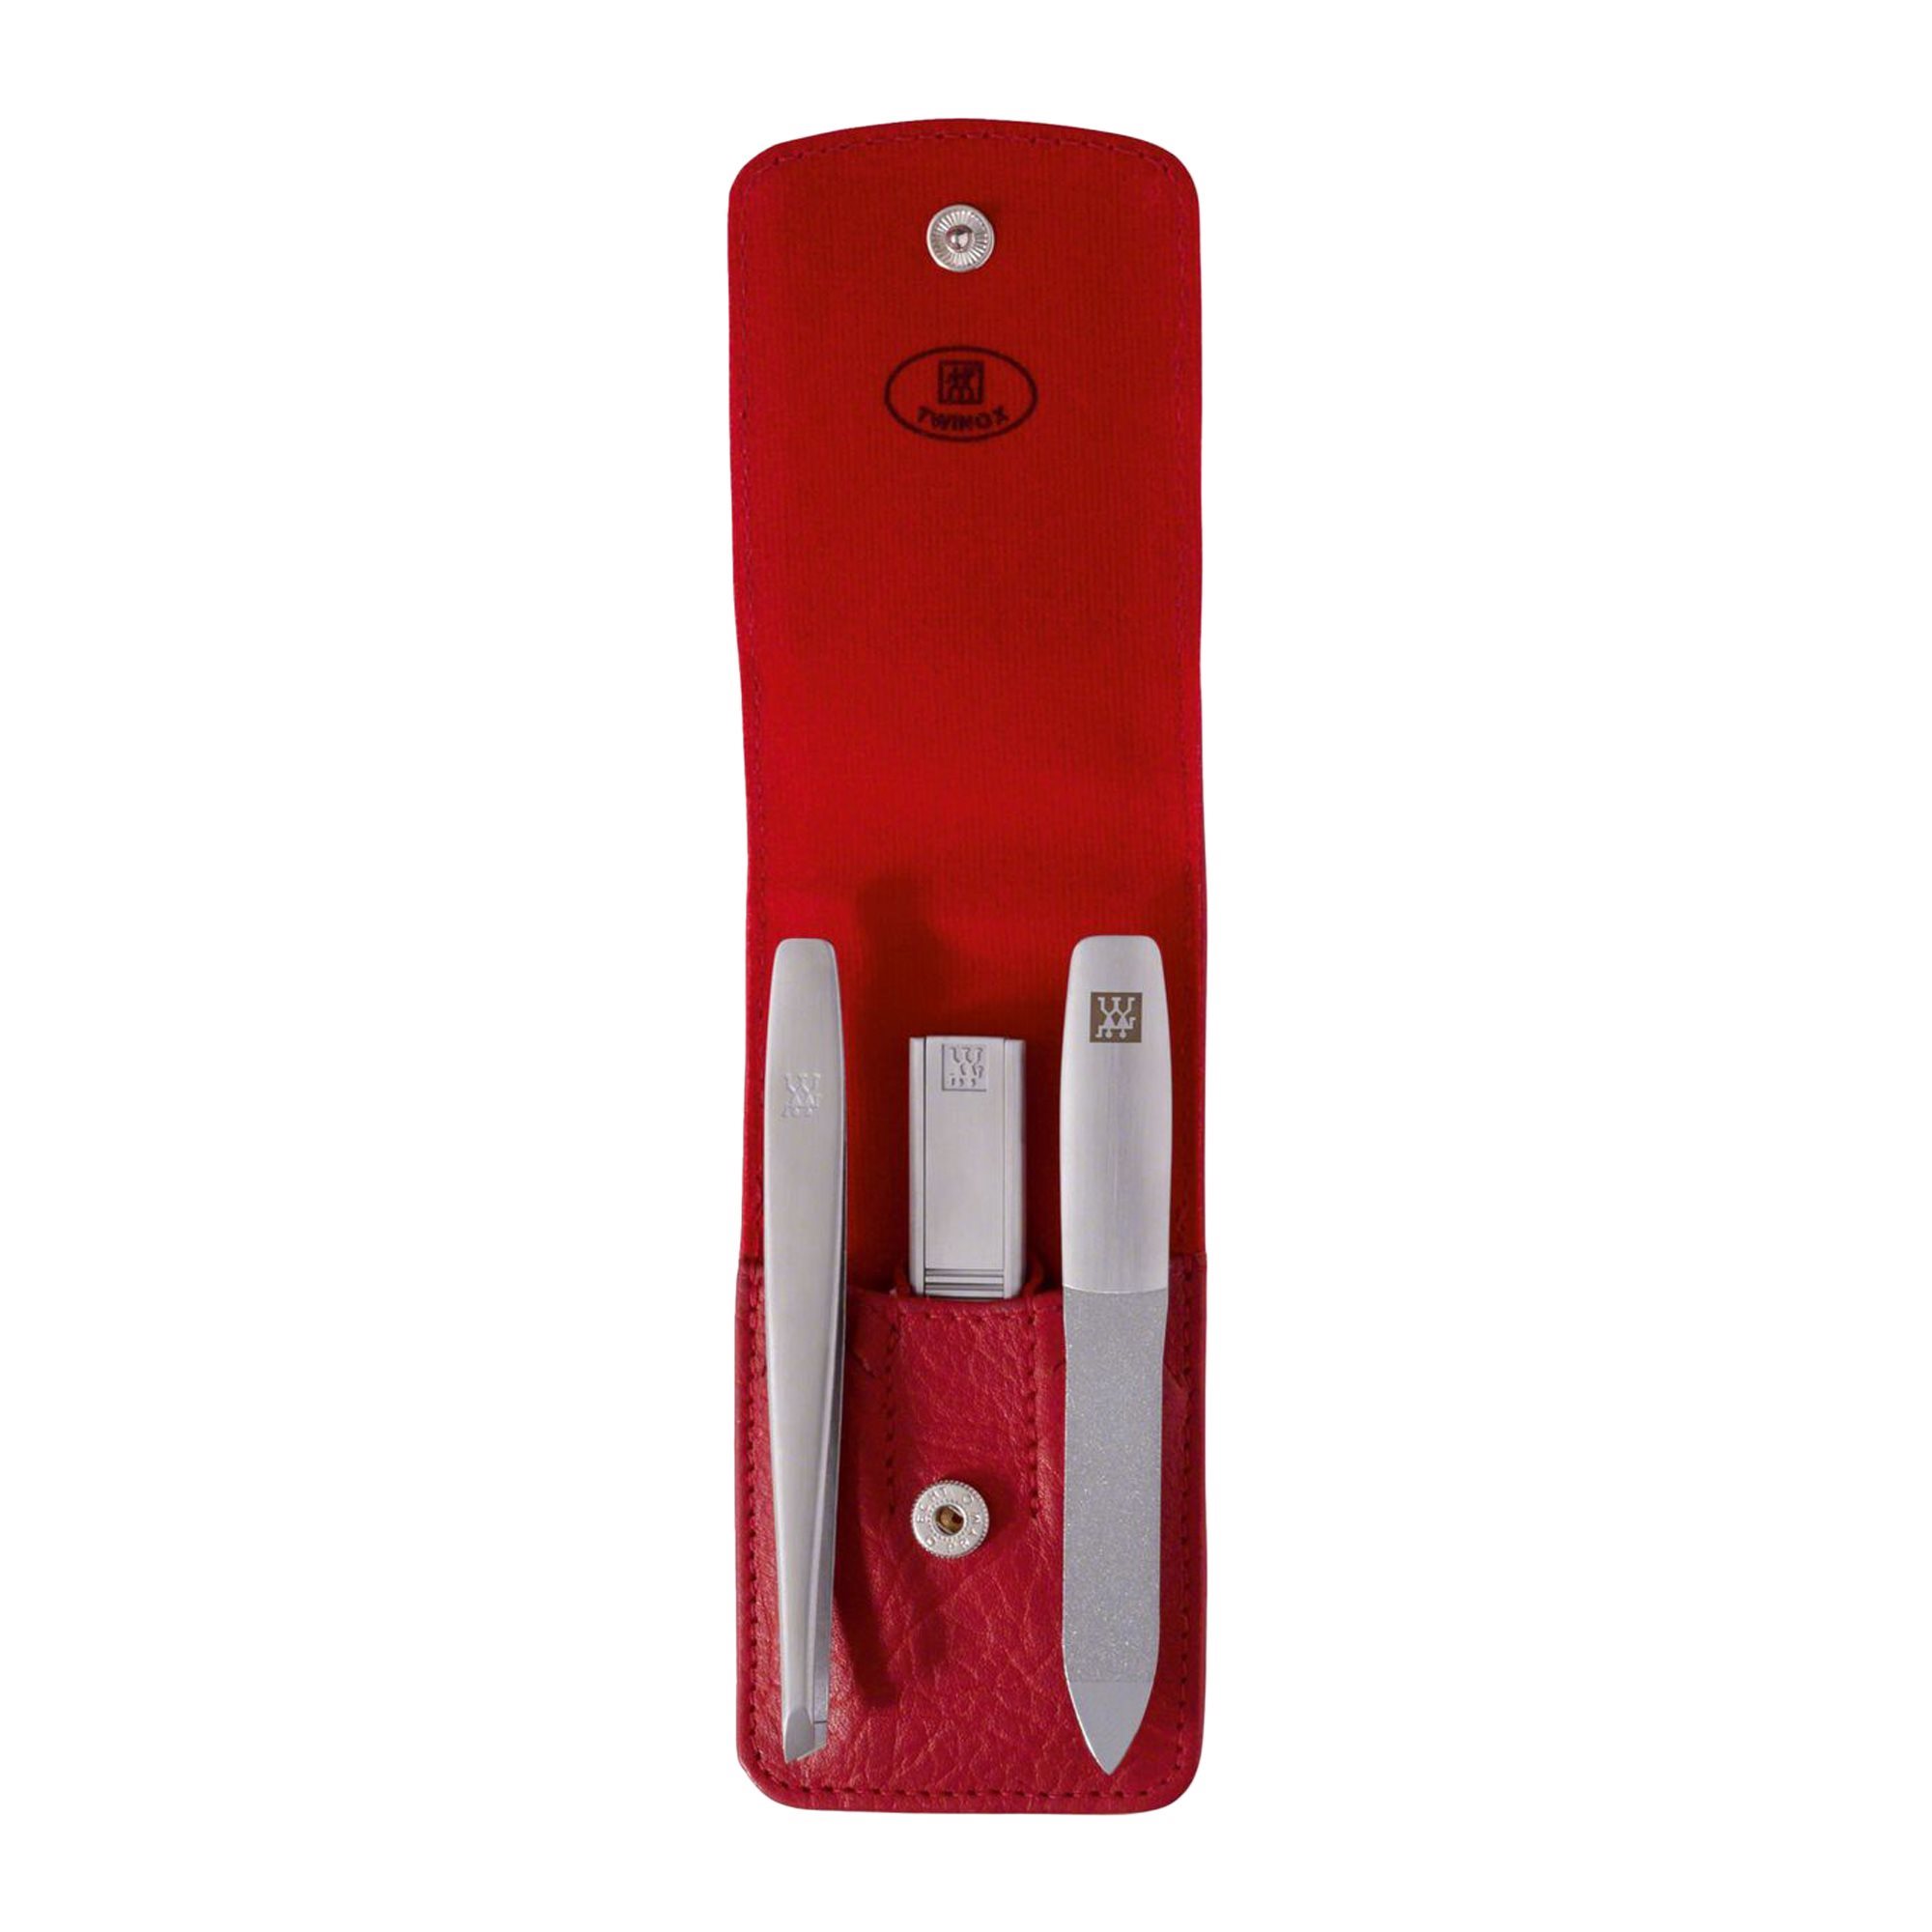 3-piece manicure set, stainless steel, red leather case, TWINOX - Zwilling  | KitchenShop